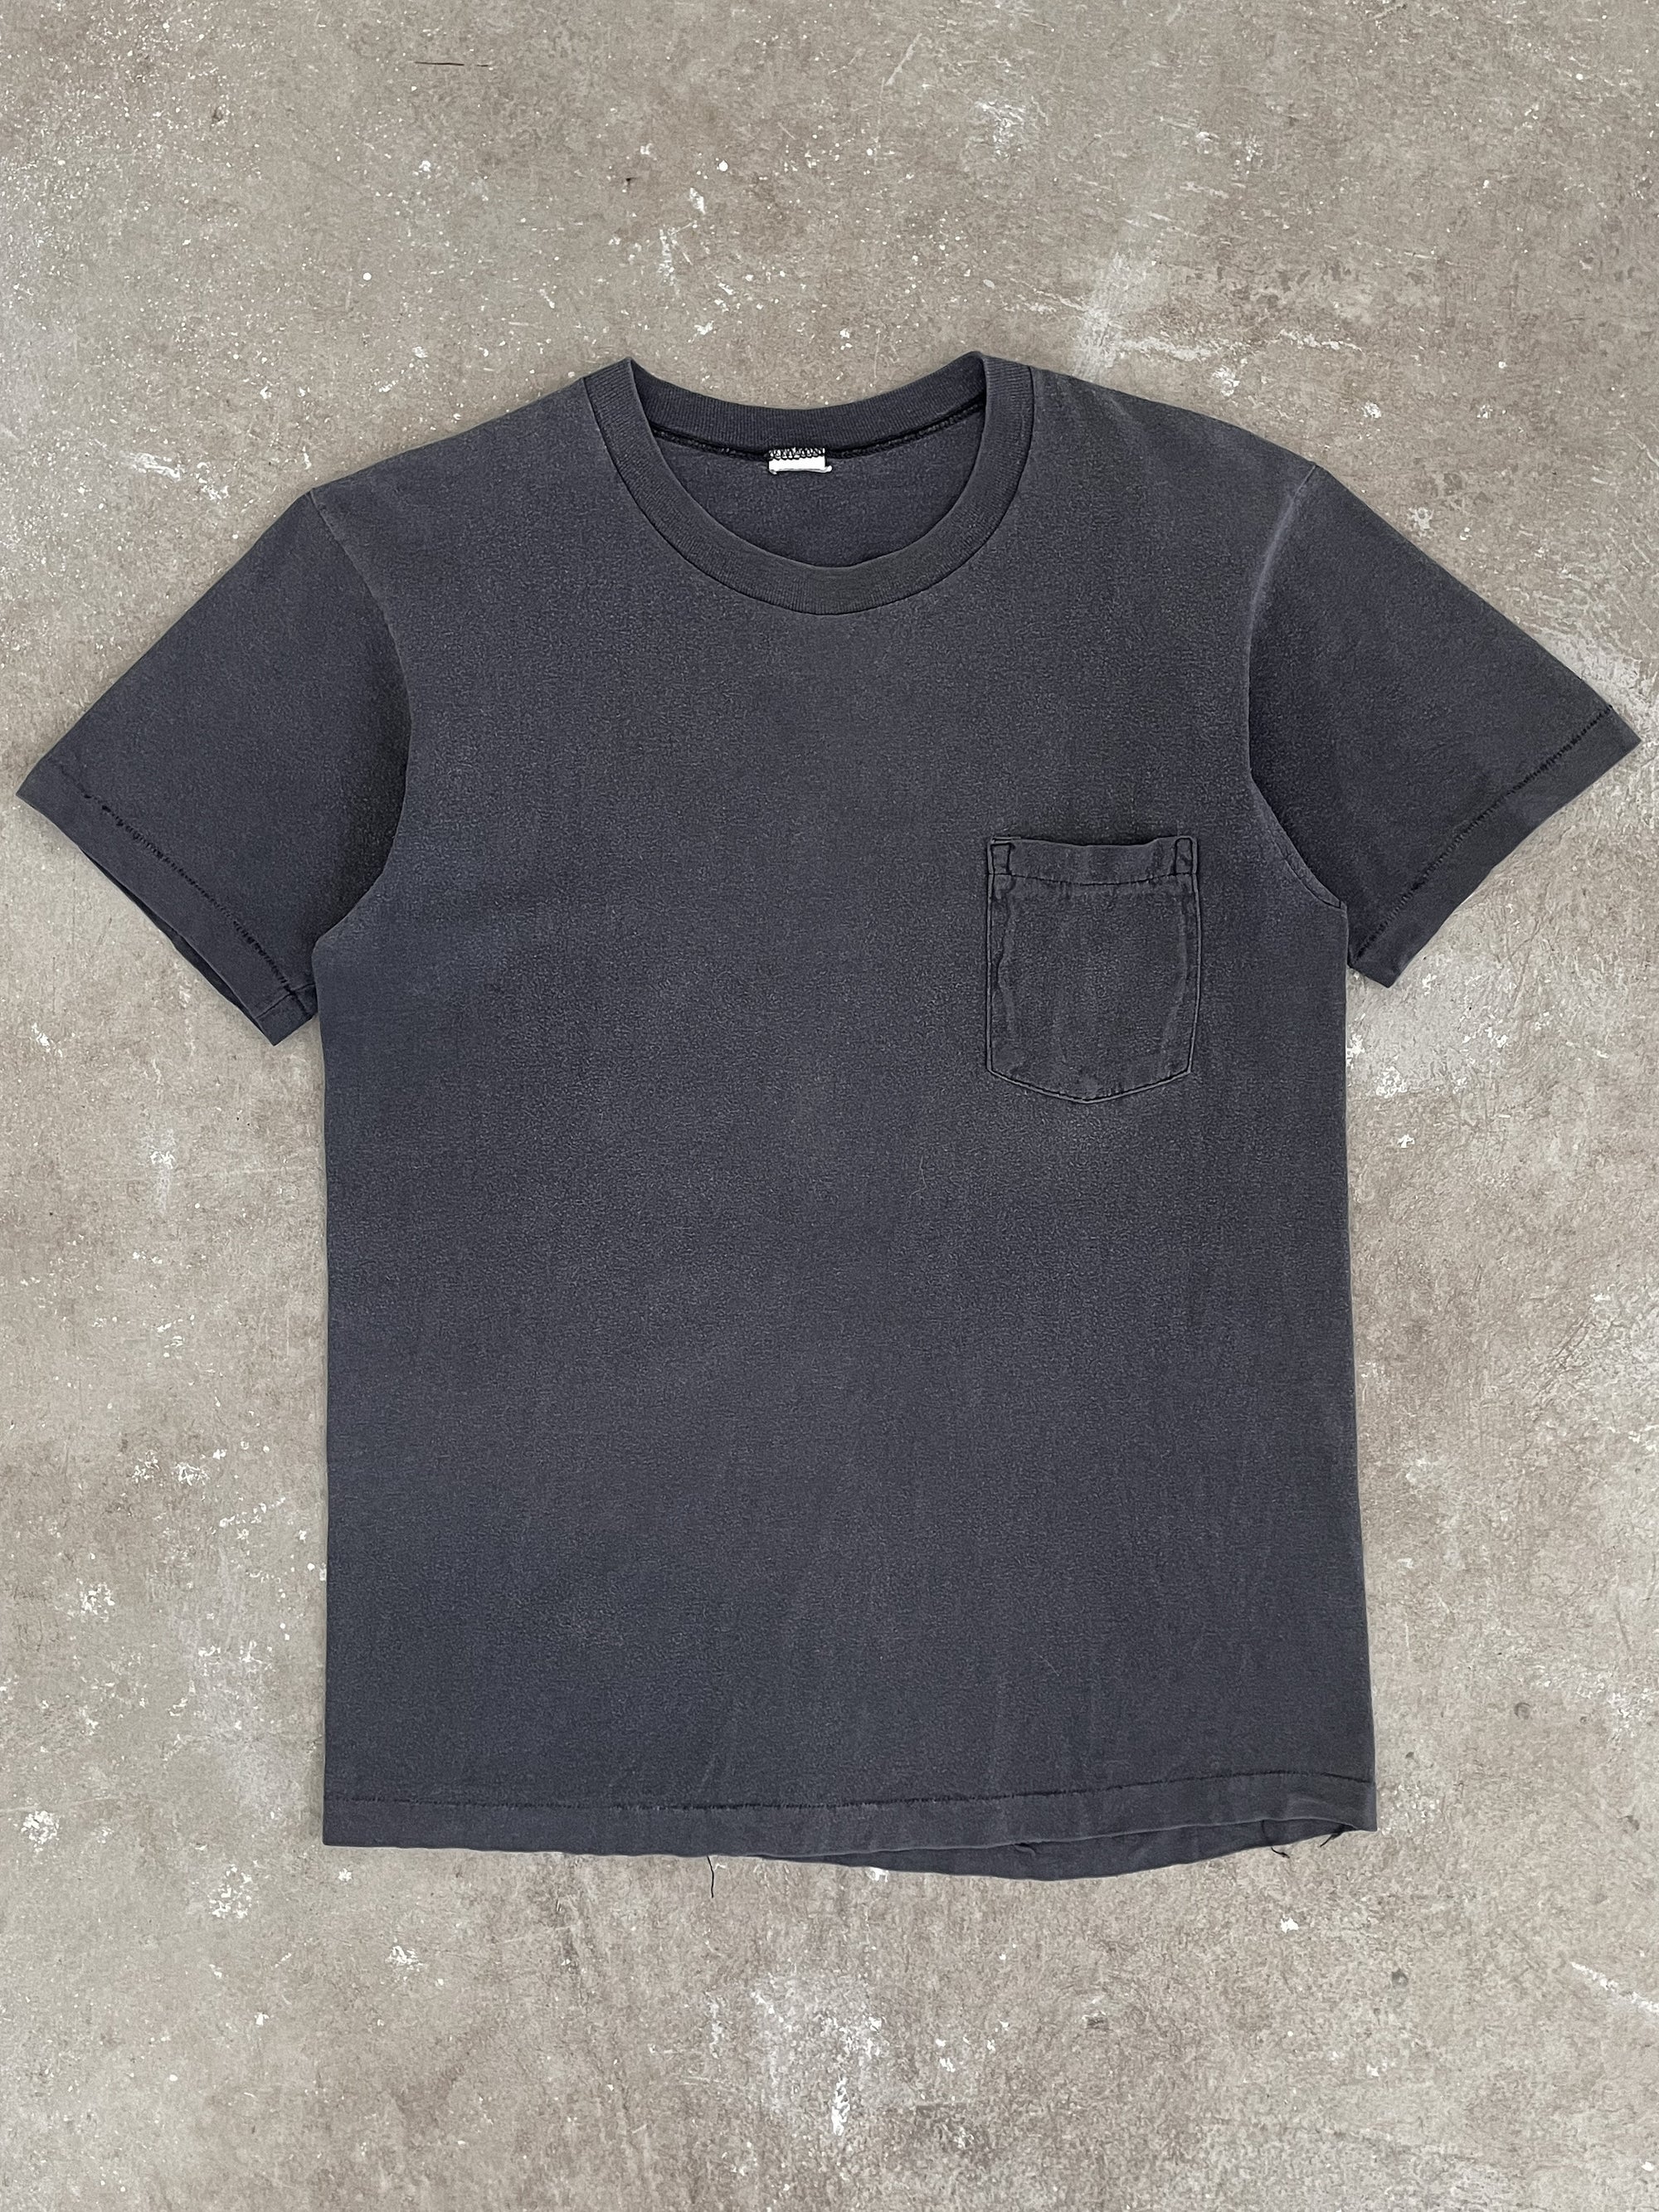 1990s Faded Charcoal Blue Pocket Tee (M)